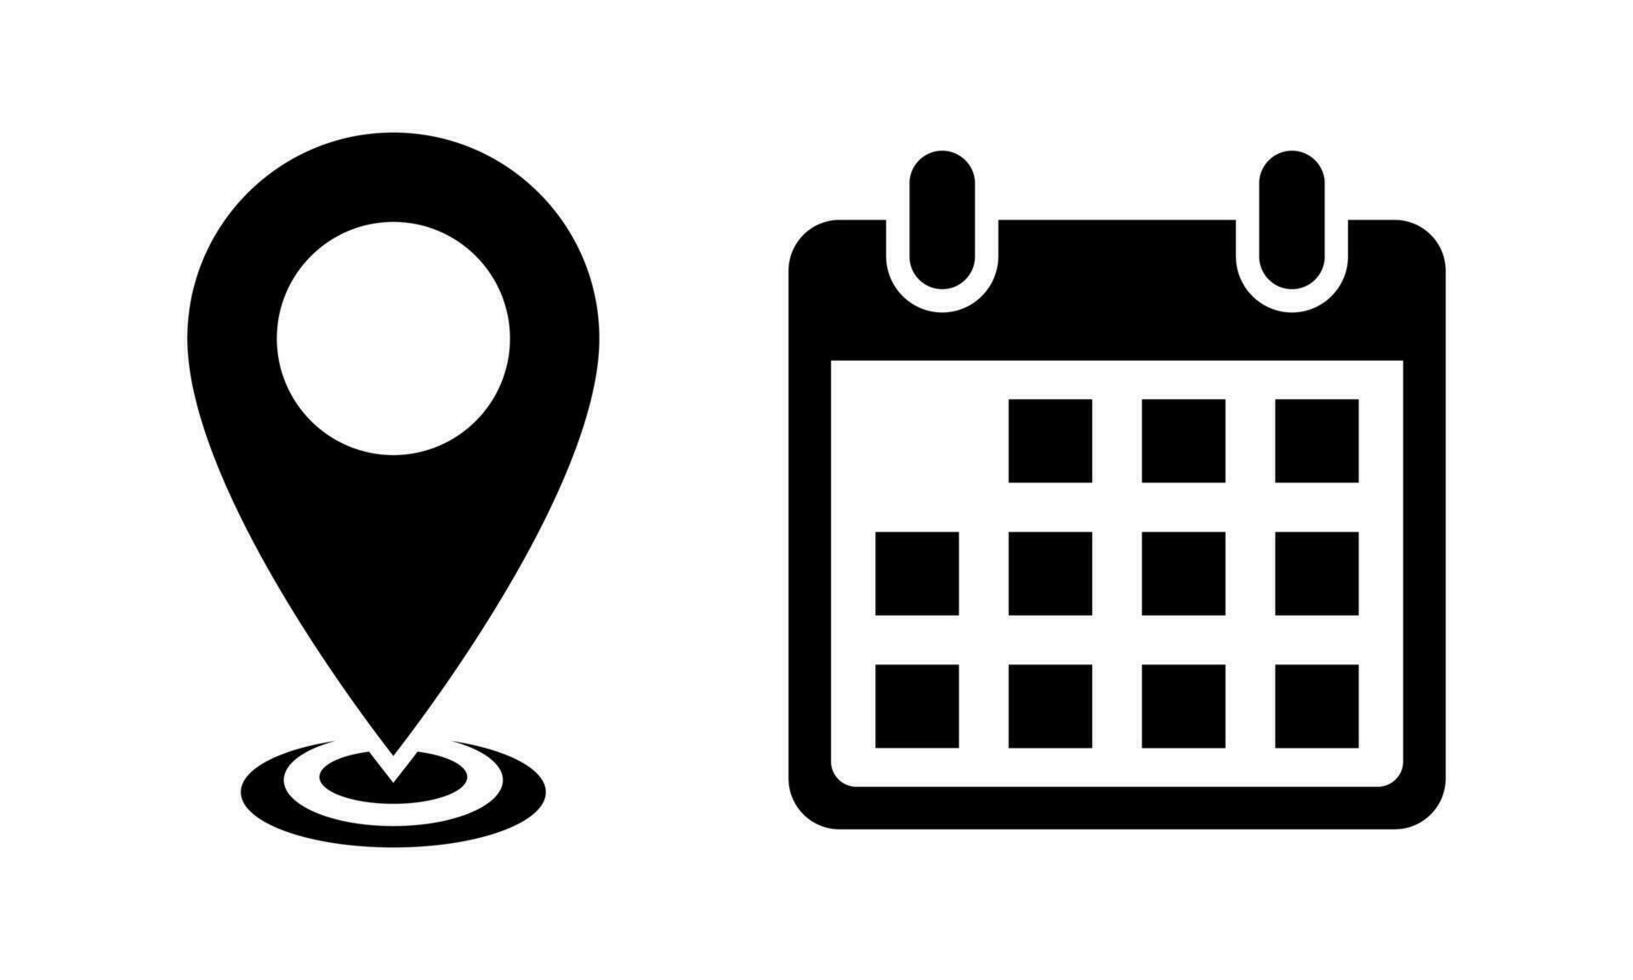 Location and calendar icon vector. Address and date sign symbol vector